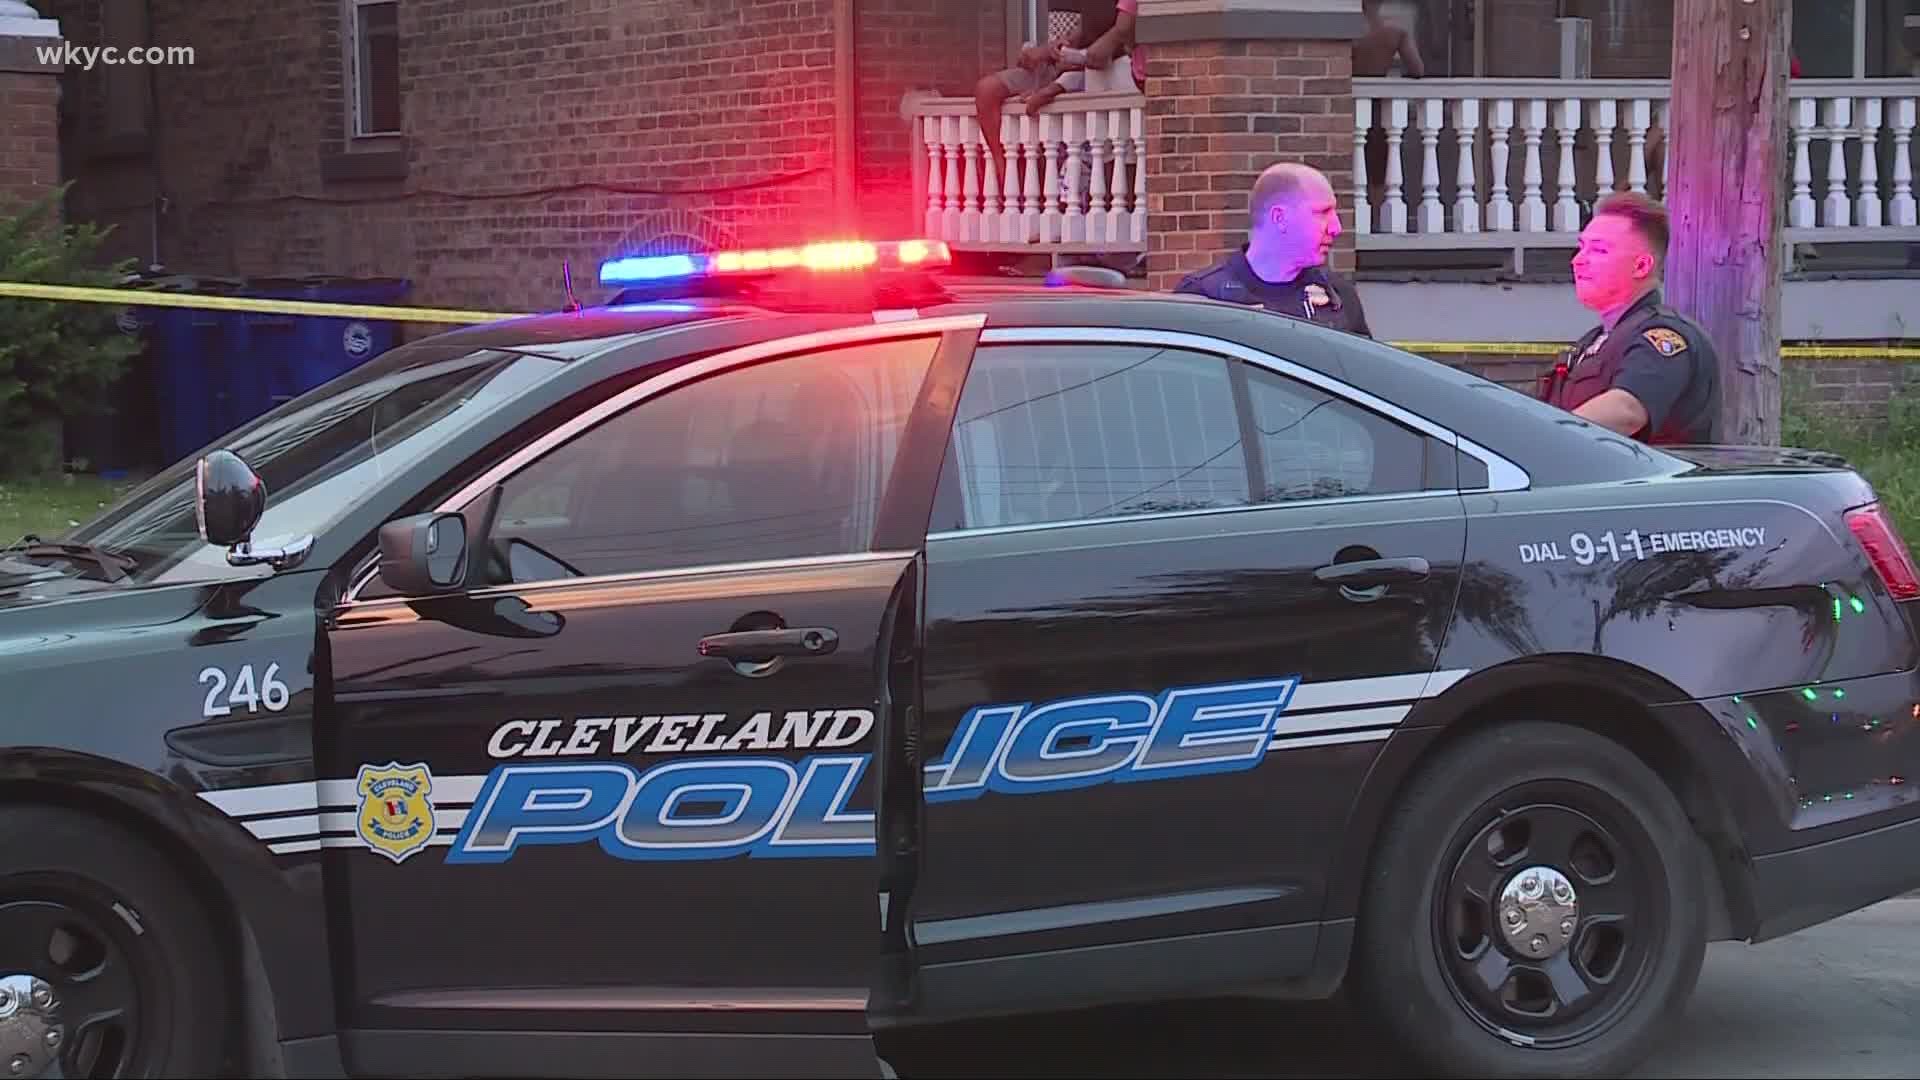 35 people were shot and 4 were stabbed over the weekend in Cleveland, resulting in 3 homicides. Lynna Lai has more on the city's response to the crimes.